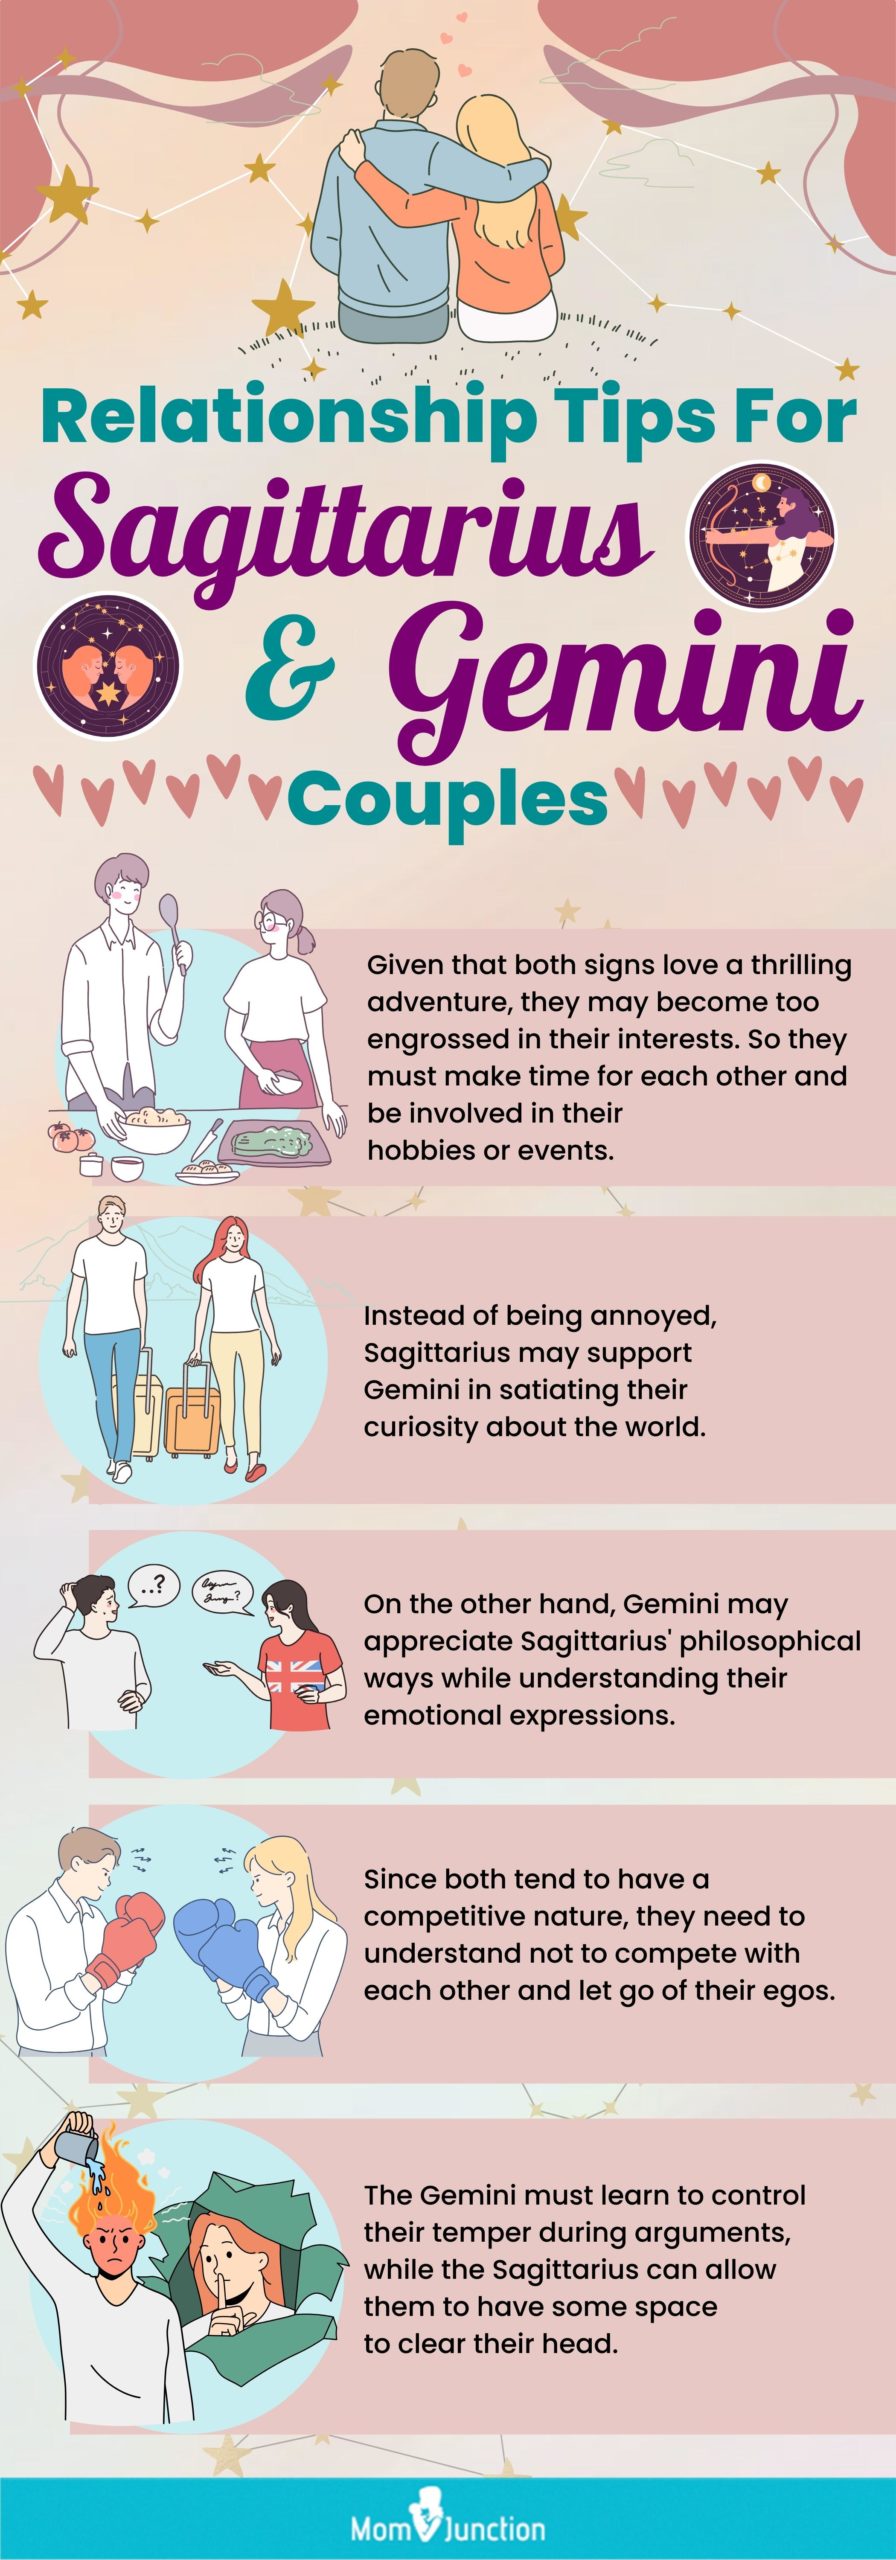 relationship tips for sagittarius and gemini couples (infographic)